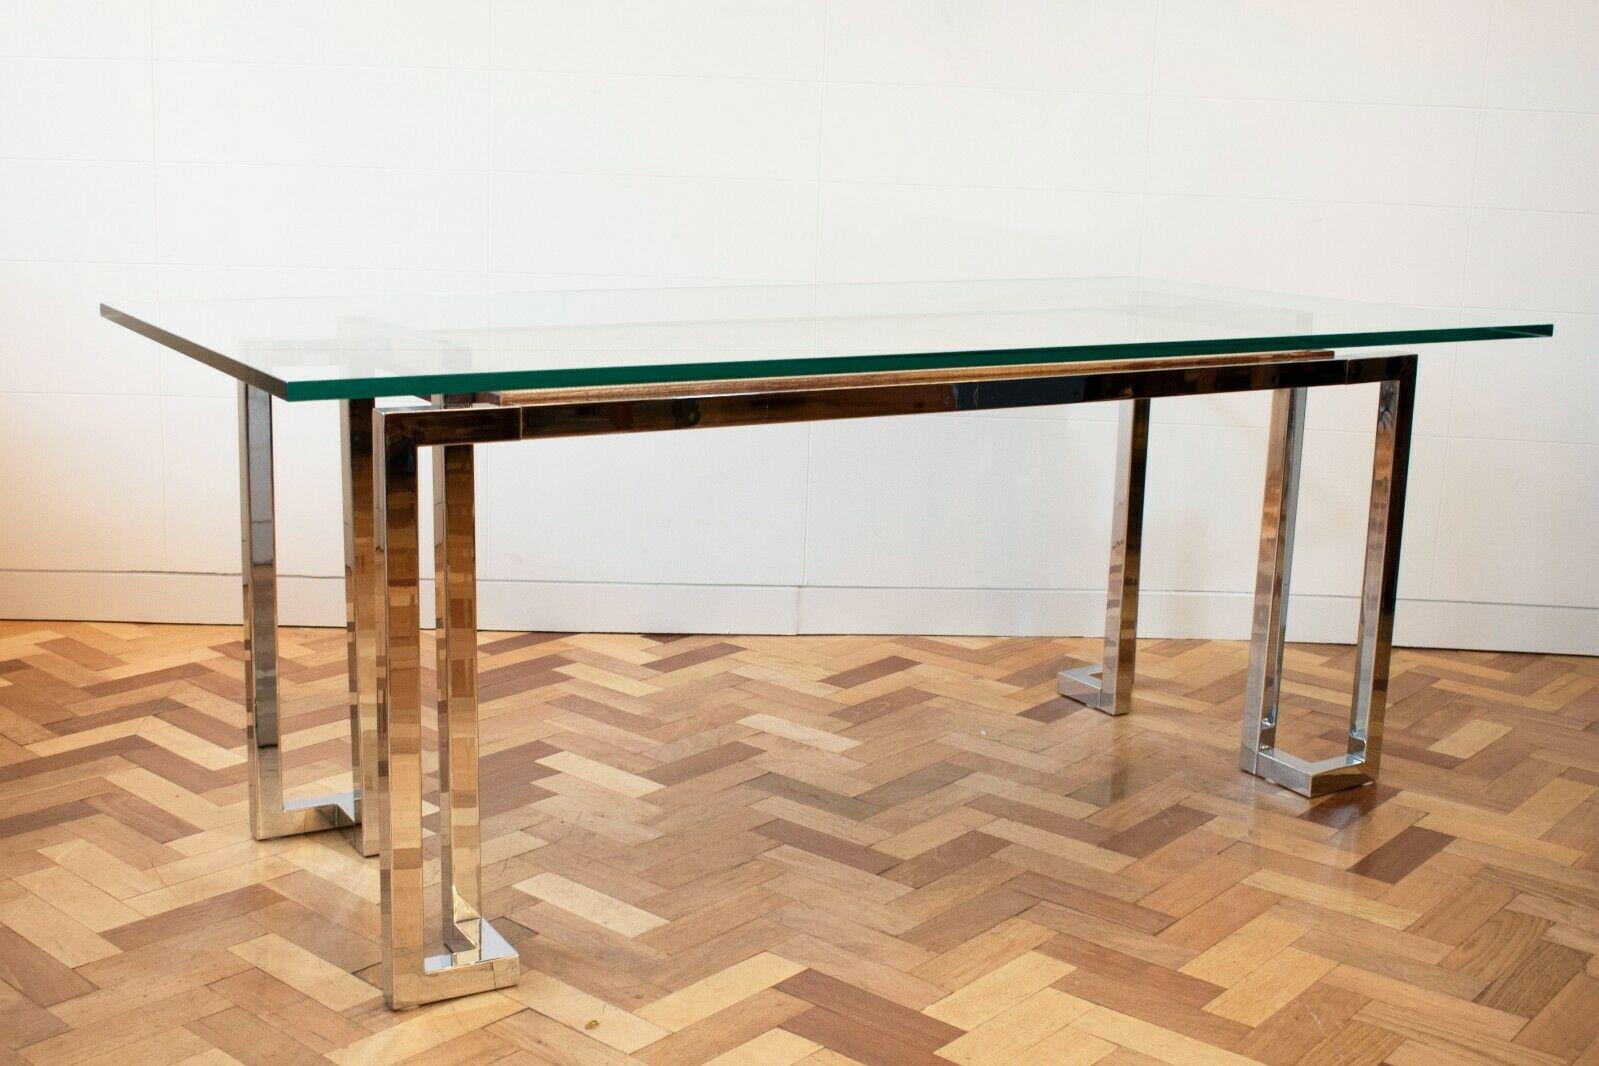 A very elegant 1970s glass desk by Pieff Lisse from the Mandarin Collection.

This desk comprises of chrome legs and framing, a glass top, all completed by a rattan shelving. 

This is a beautifully elegant piece that compliments any